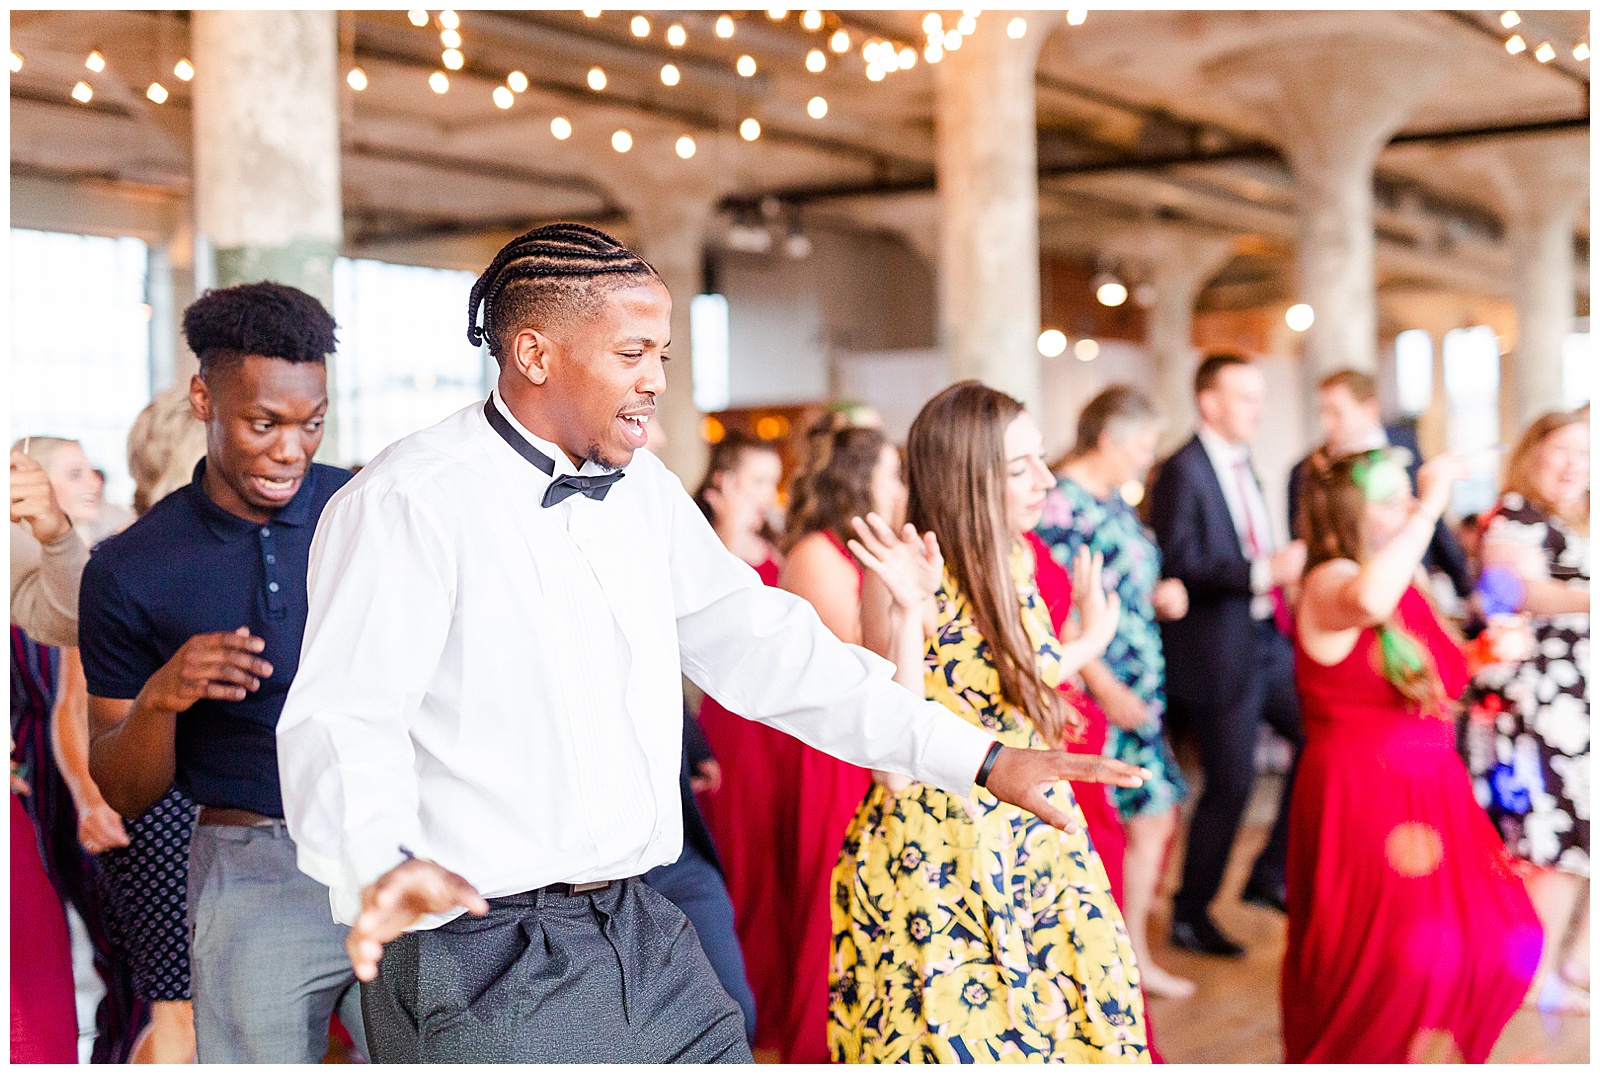 Join the dance party at Rustic Airy Indoor Wedding Venue with fairy lights - Red-Themed Bridesmaid Dress Ideas from Elegant Modern Summer Wedding in Charlotte, NC | check out the full wedding at KevynDixonPhoto.com